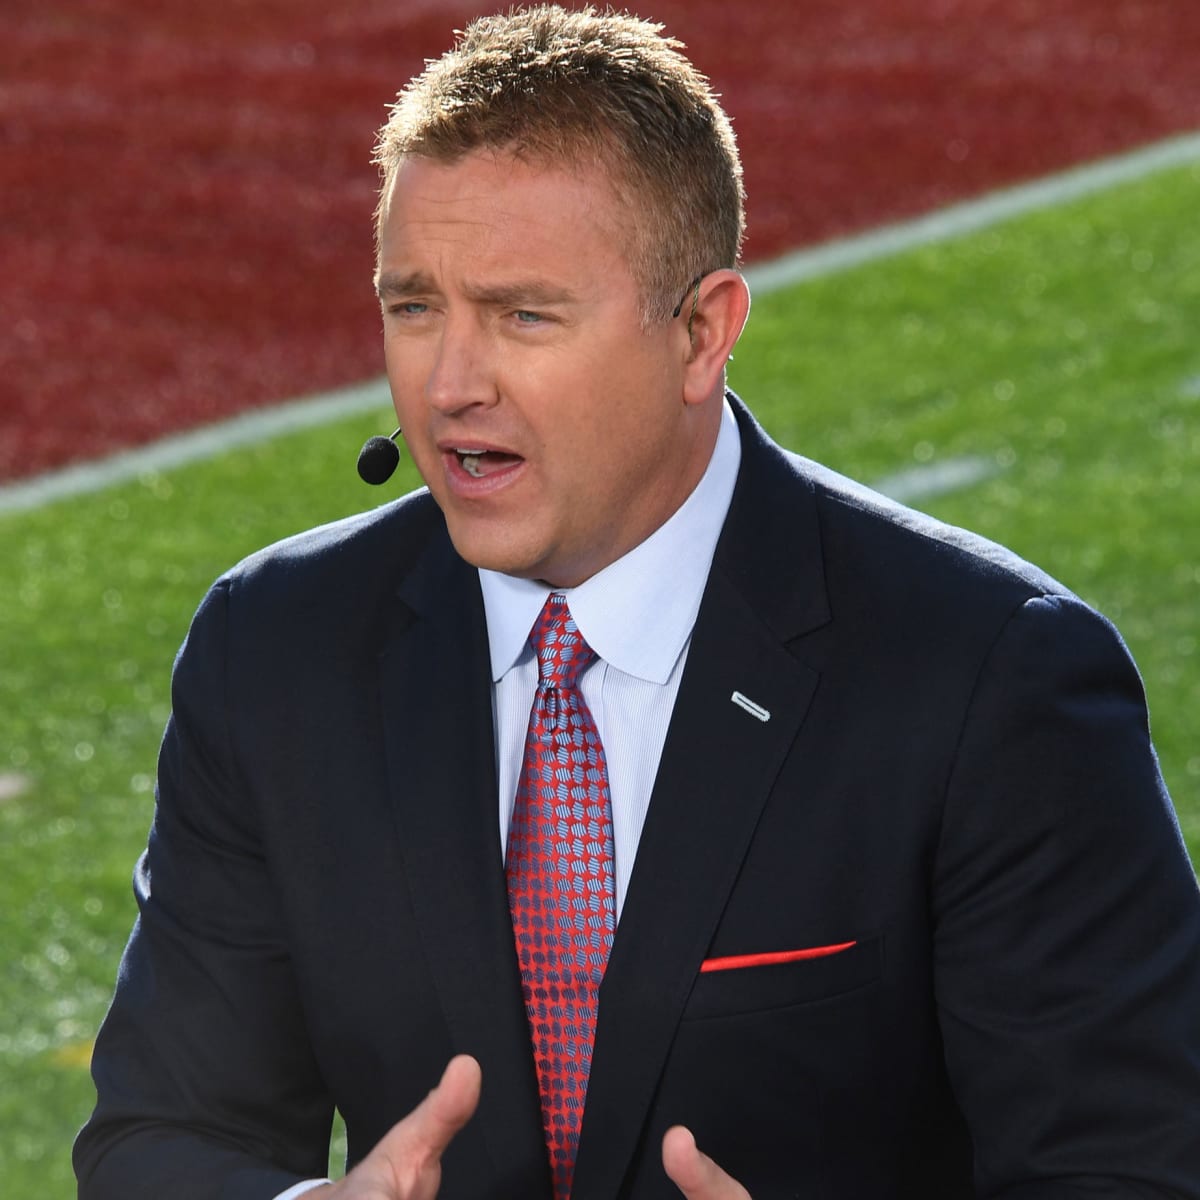 Kirk Herbstreit, voice of college football, tackles the NFL, age